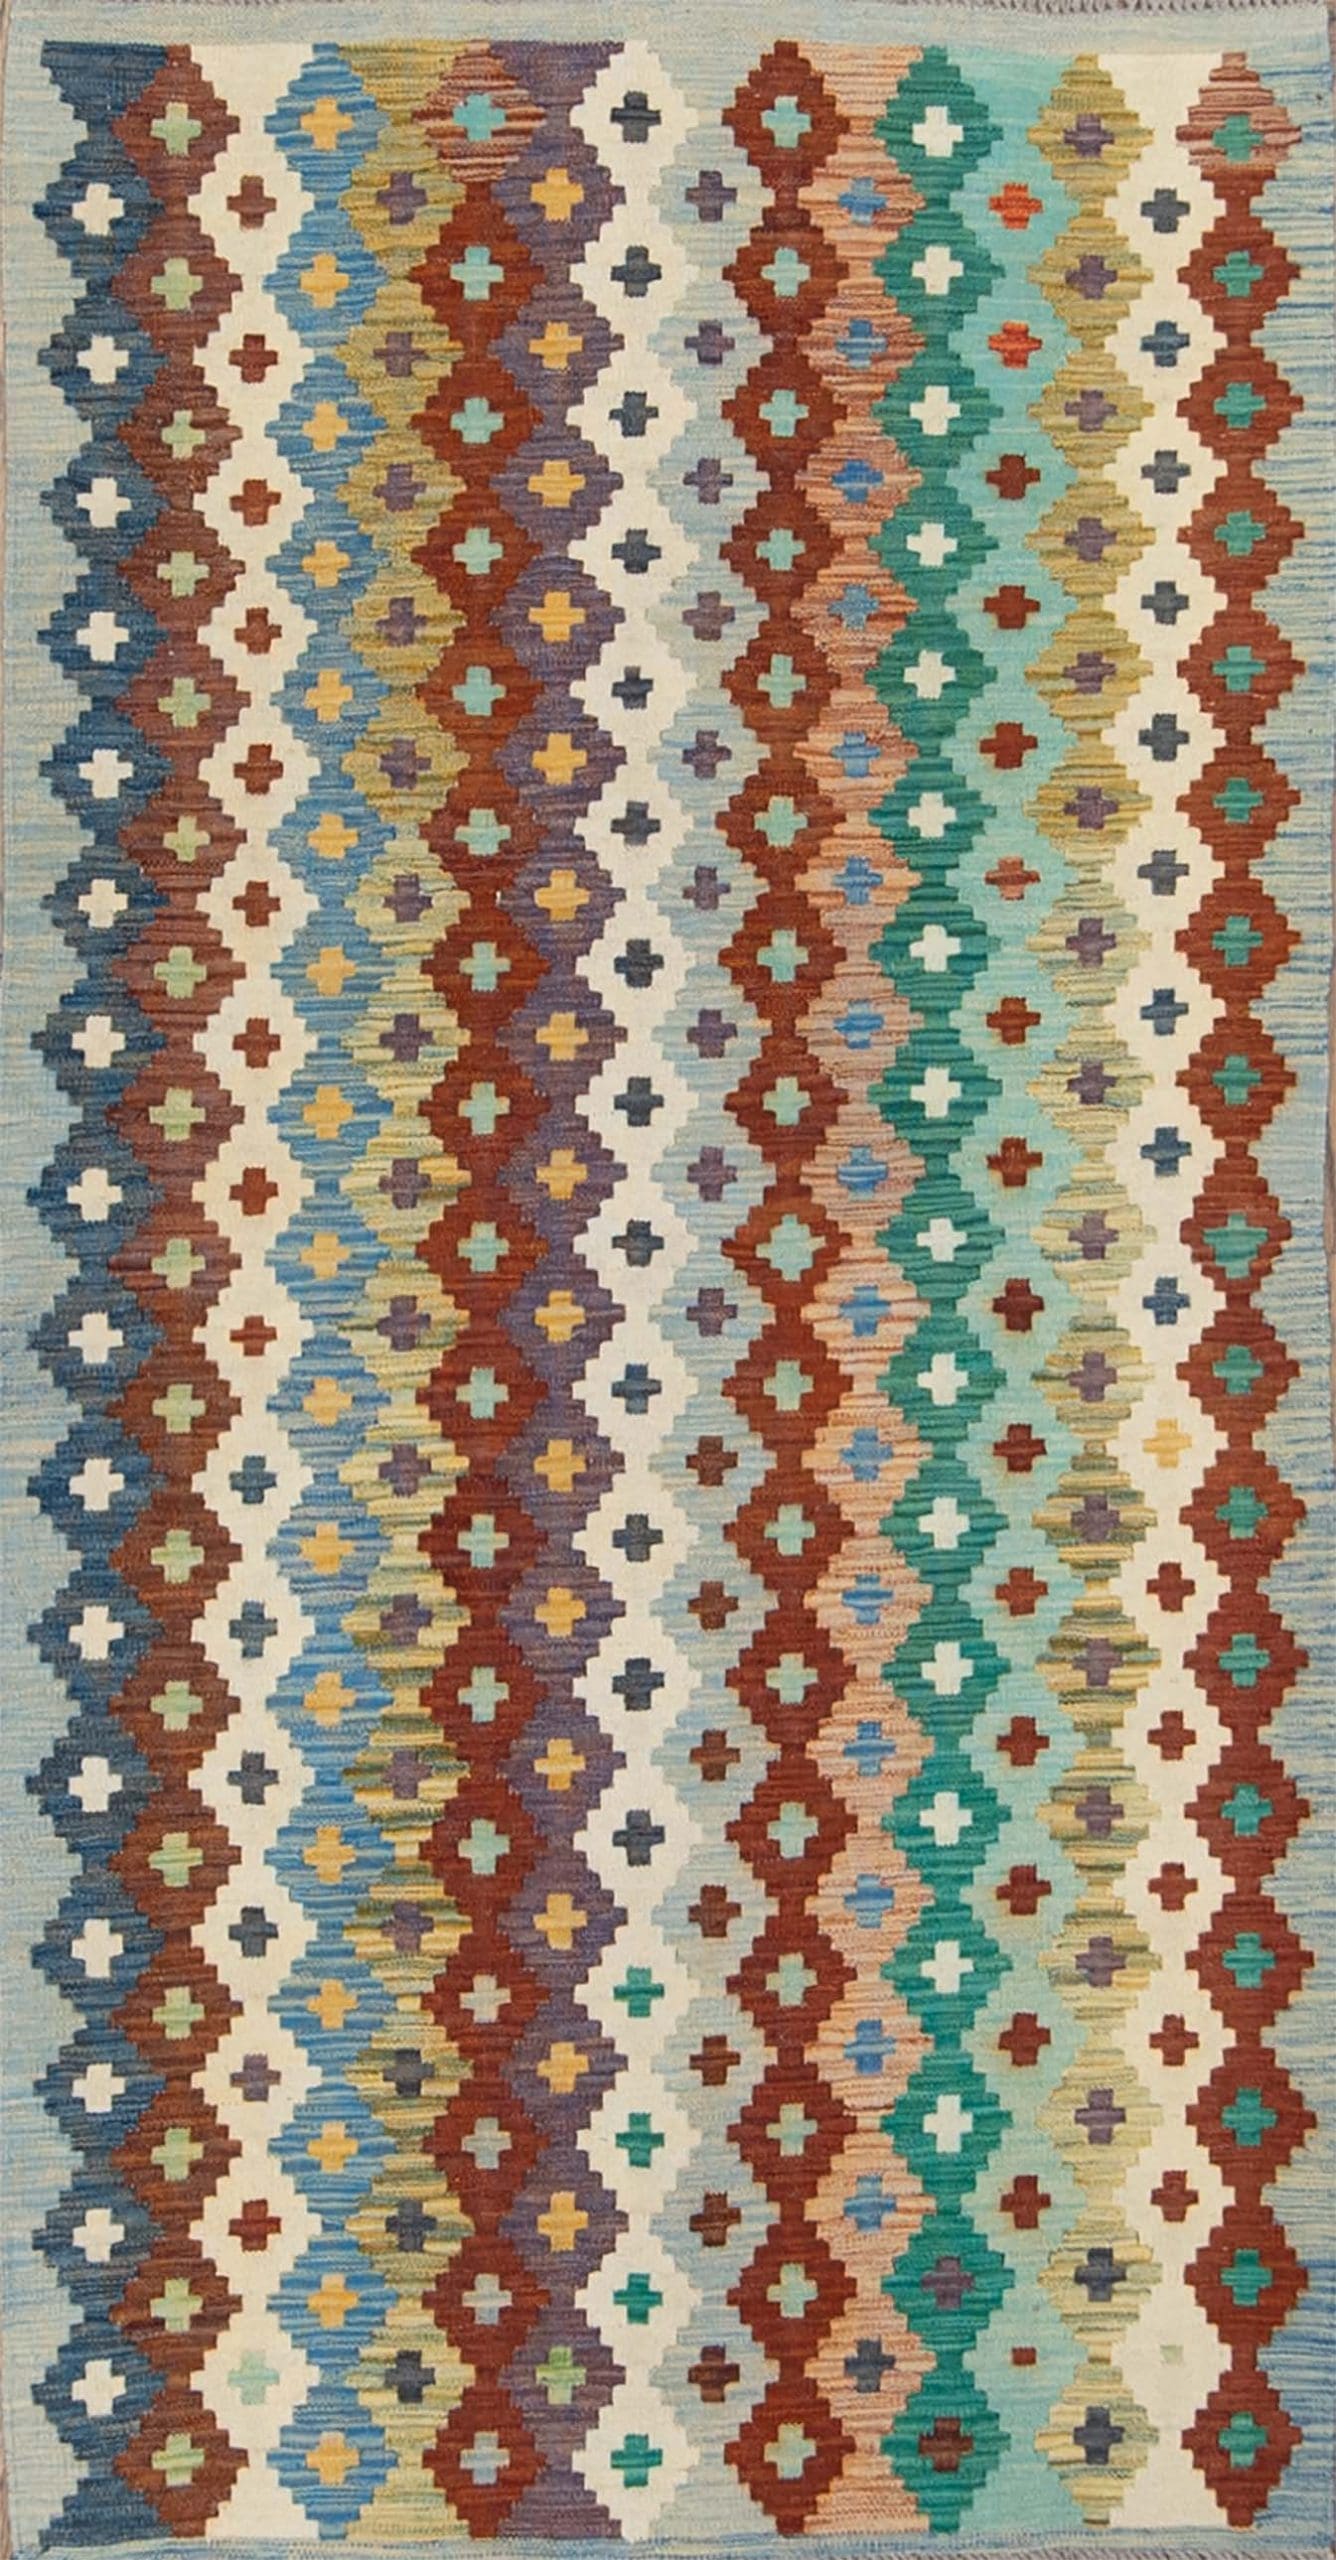 Hand-woven wool kilim runner rug made in Pakistan, beige and multicolor. Size 3.6x6.3.